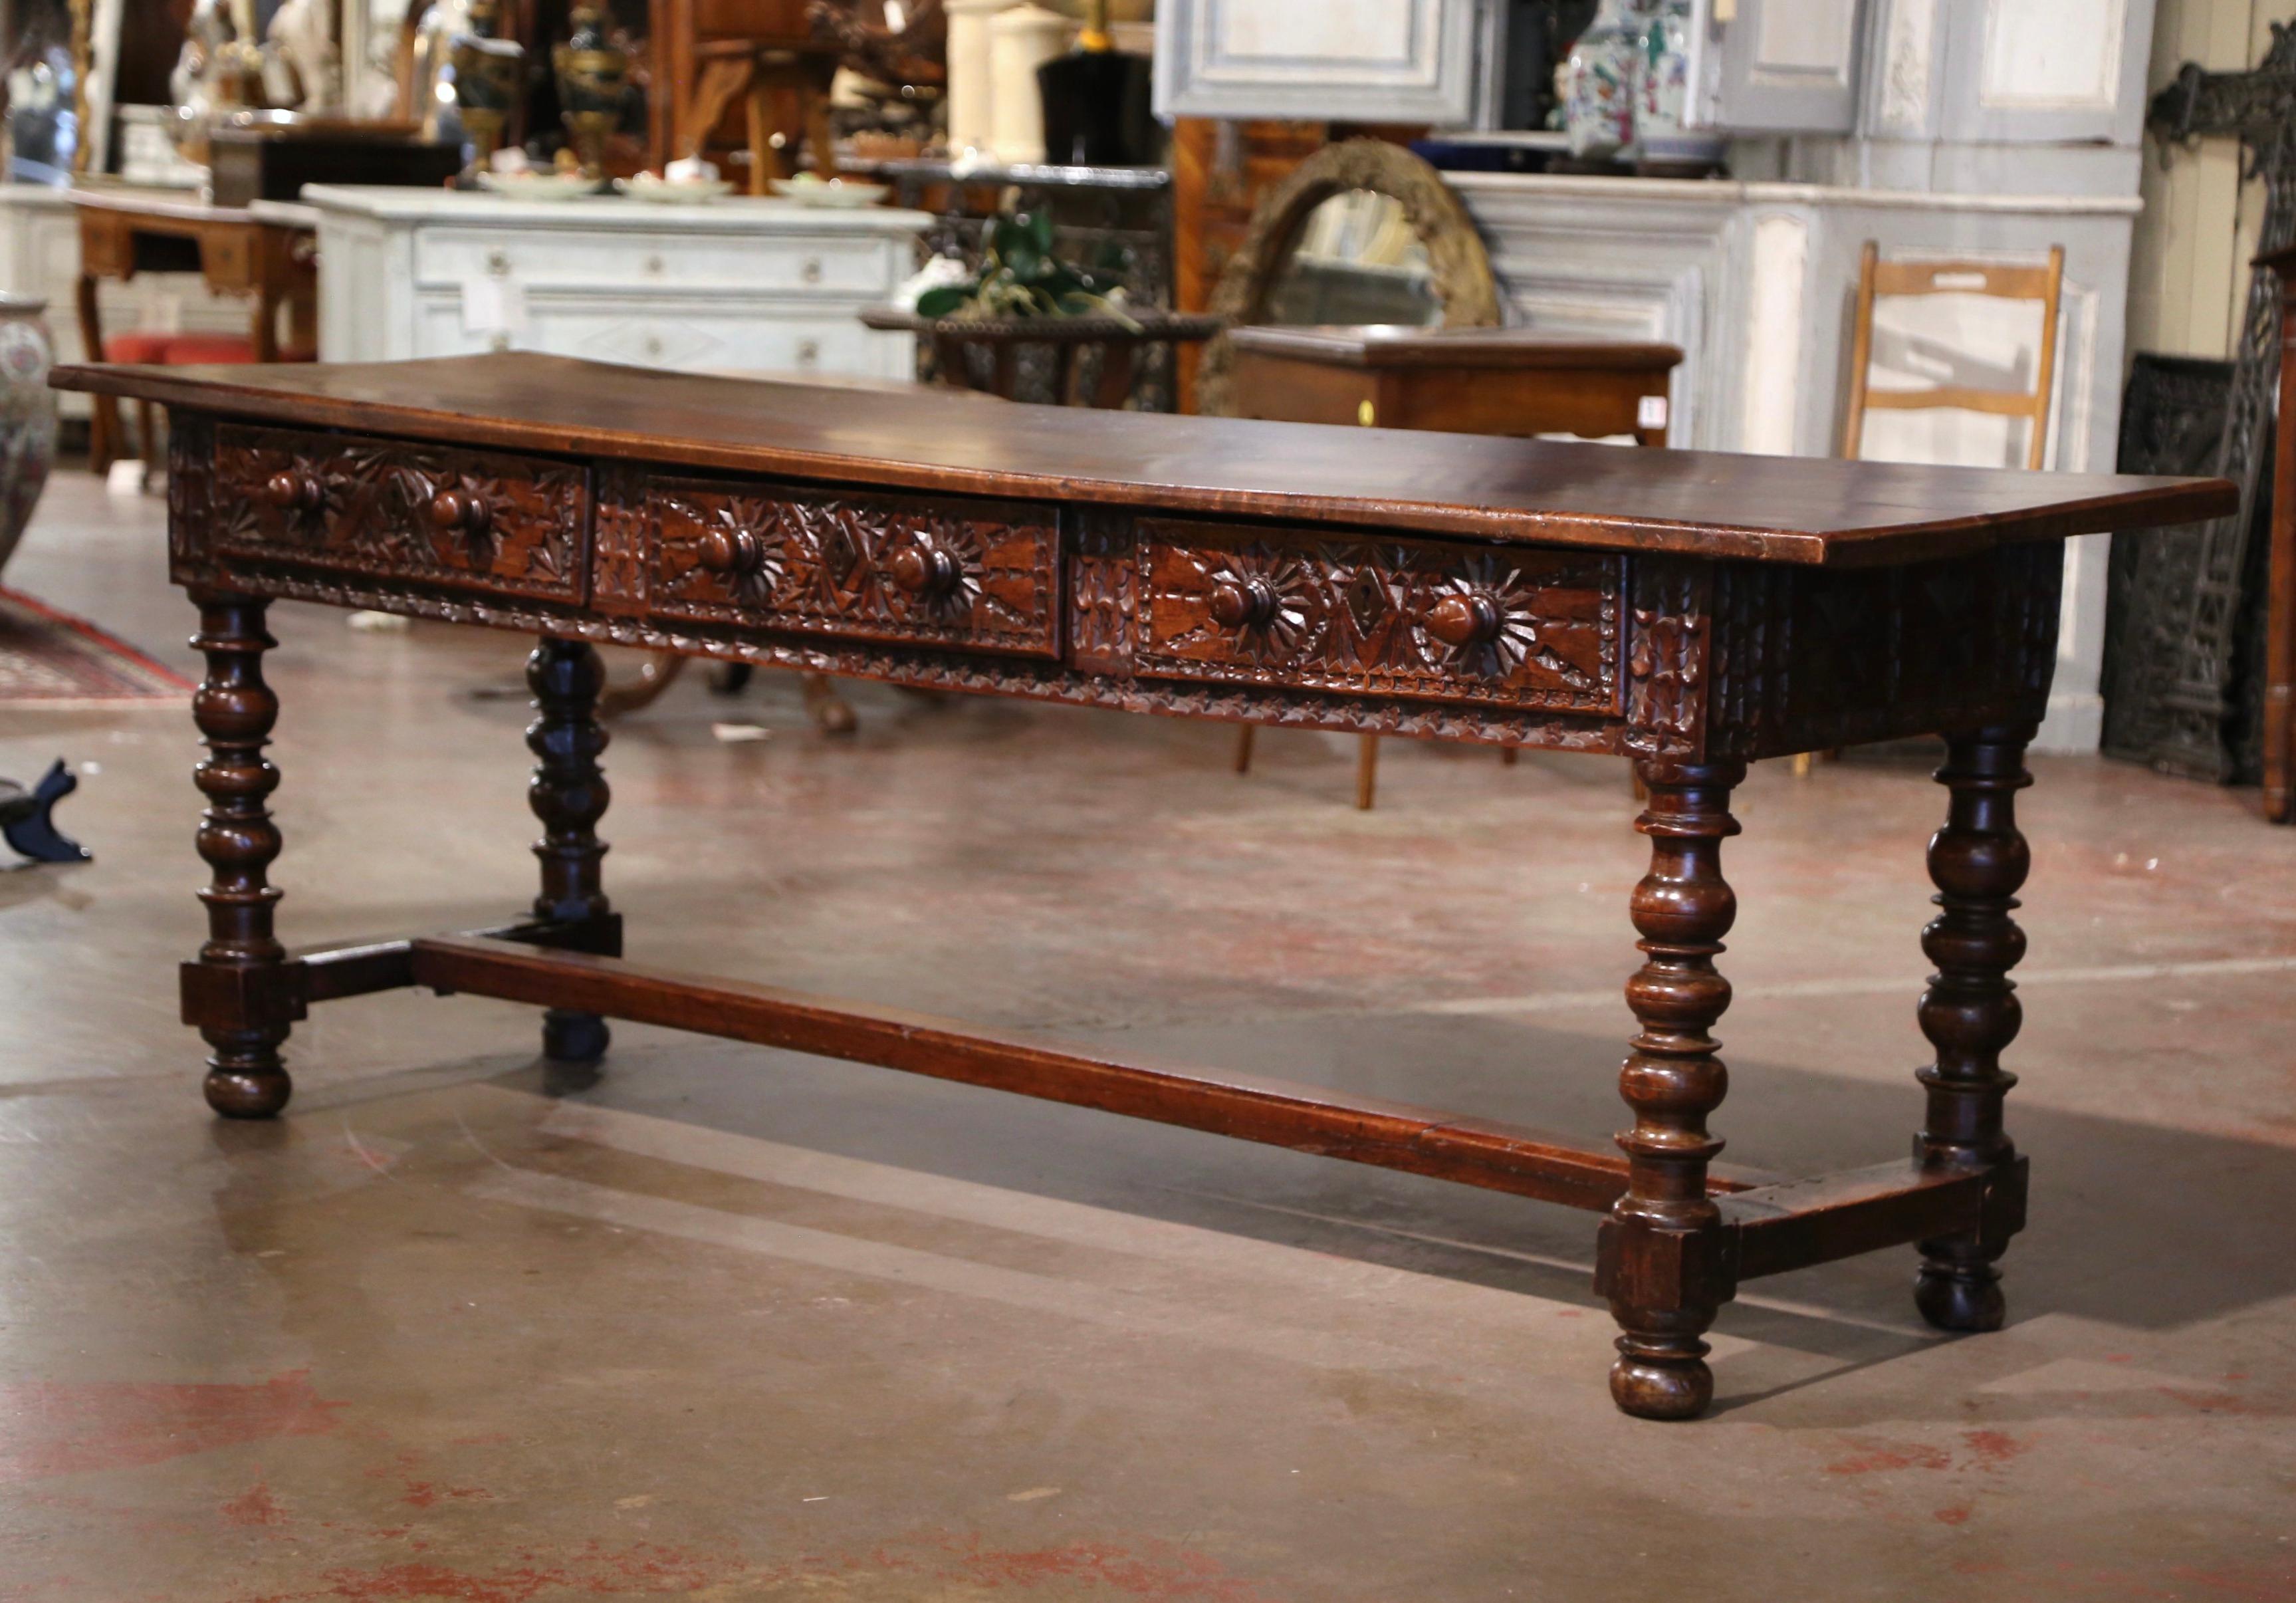 This elegant antique fruitwood Baroque console was crafted in Spain, circa 1680. Carved on all four sides, the long sofa table stands on thick turned legs ending with bun feet over a bottom stretcher at the base. The console features a single plank